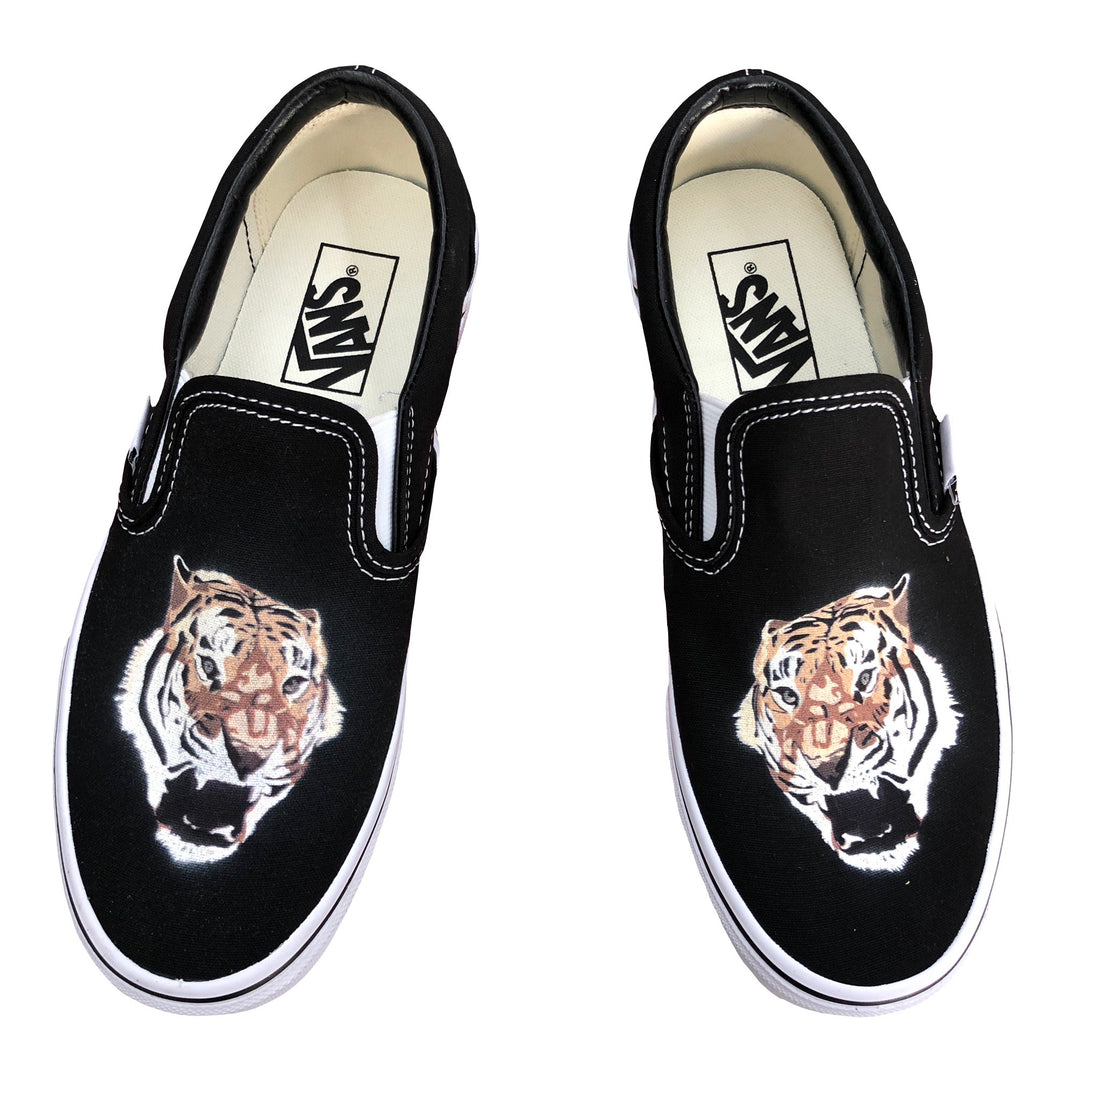 Rep Your Favorite Wildlife Animal with Custom Printed Shoes